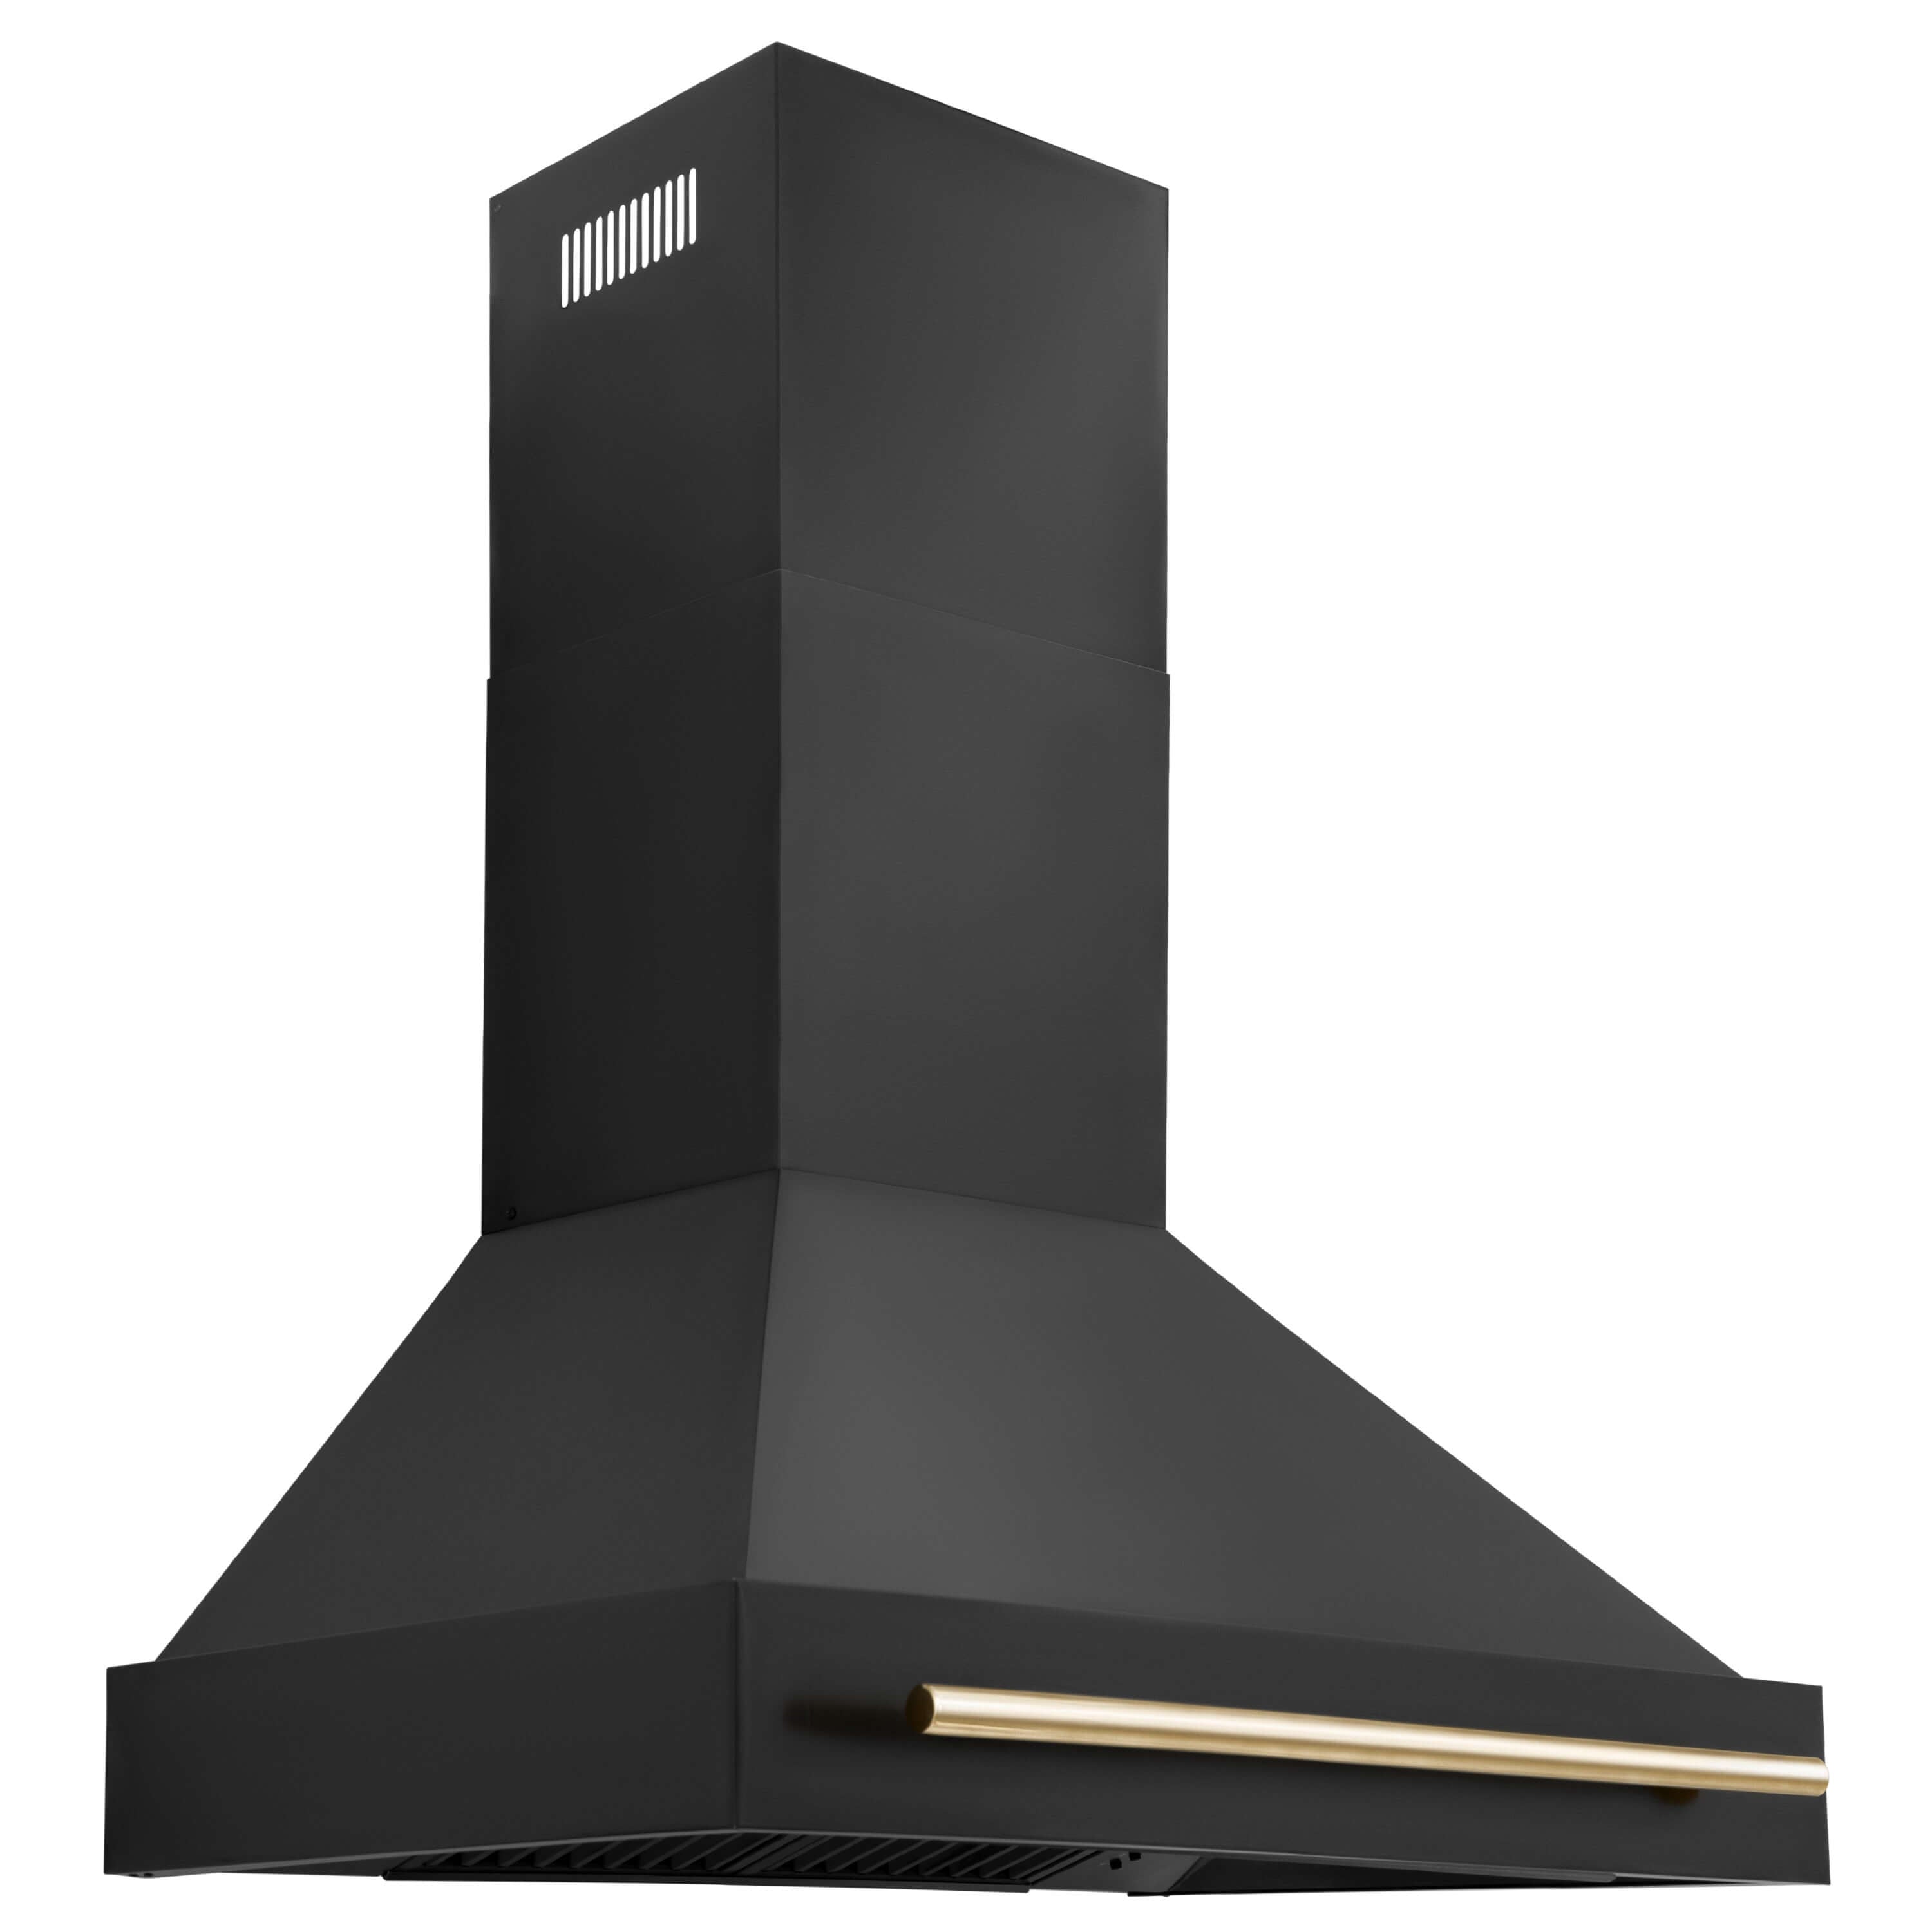 ZLINE 36 in. Autograph Edition Black Stainless Steel Range Hood with Handle (BS655Z-36)